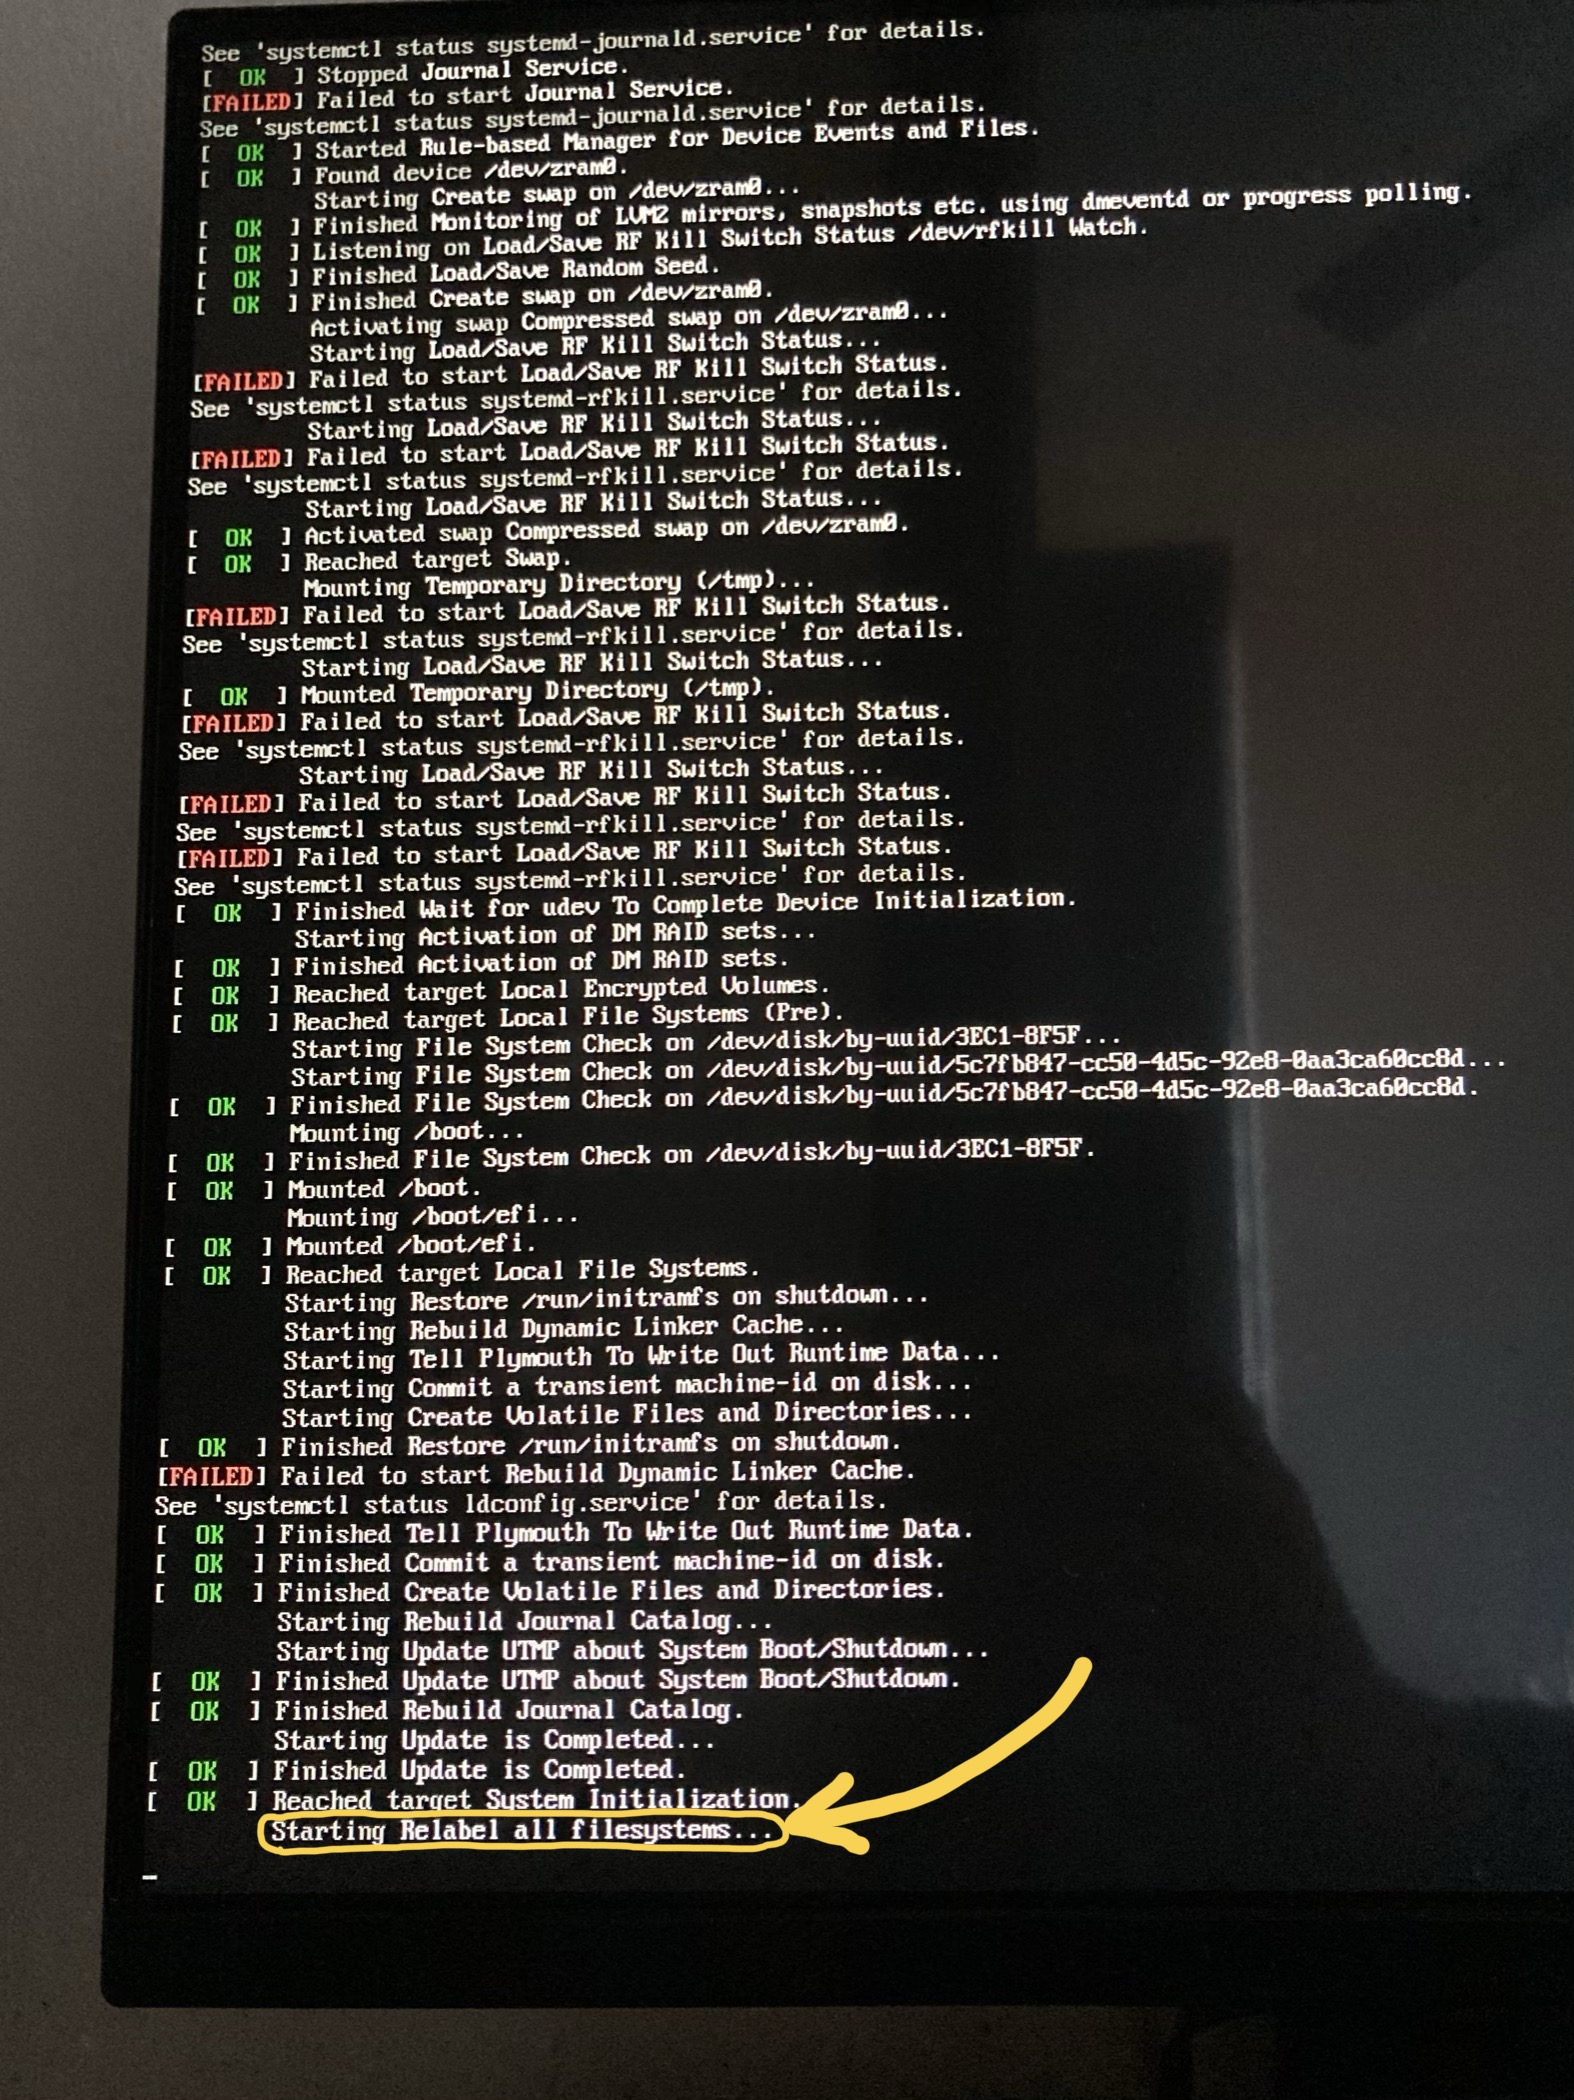 Boot message indicating file systems are being relabeled forSELinux